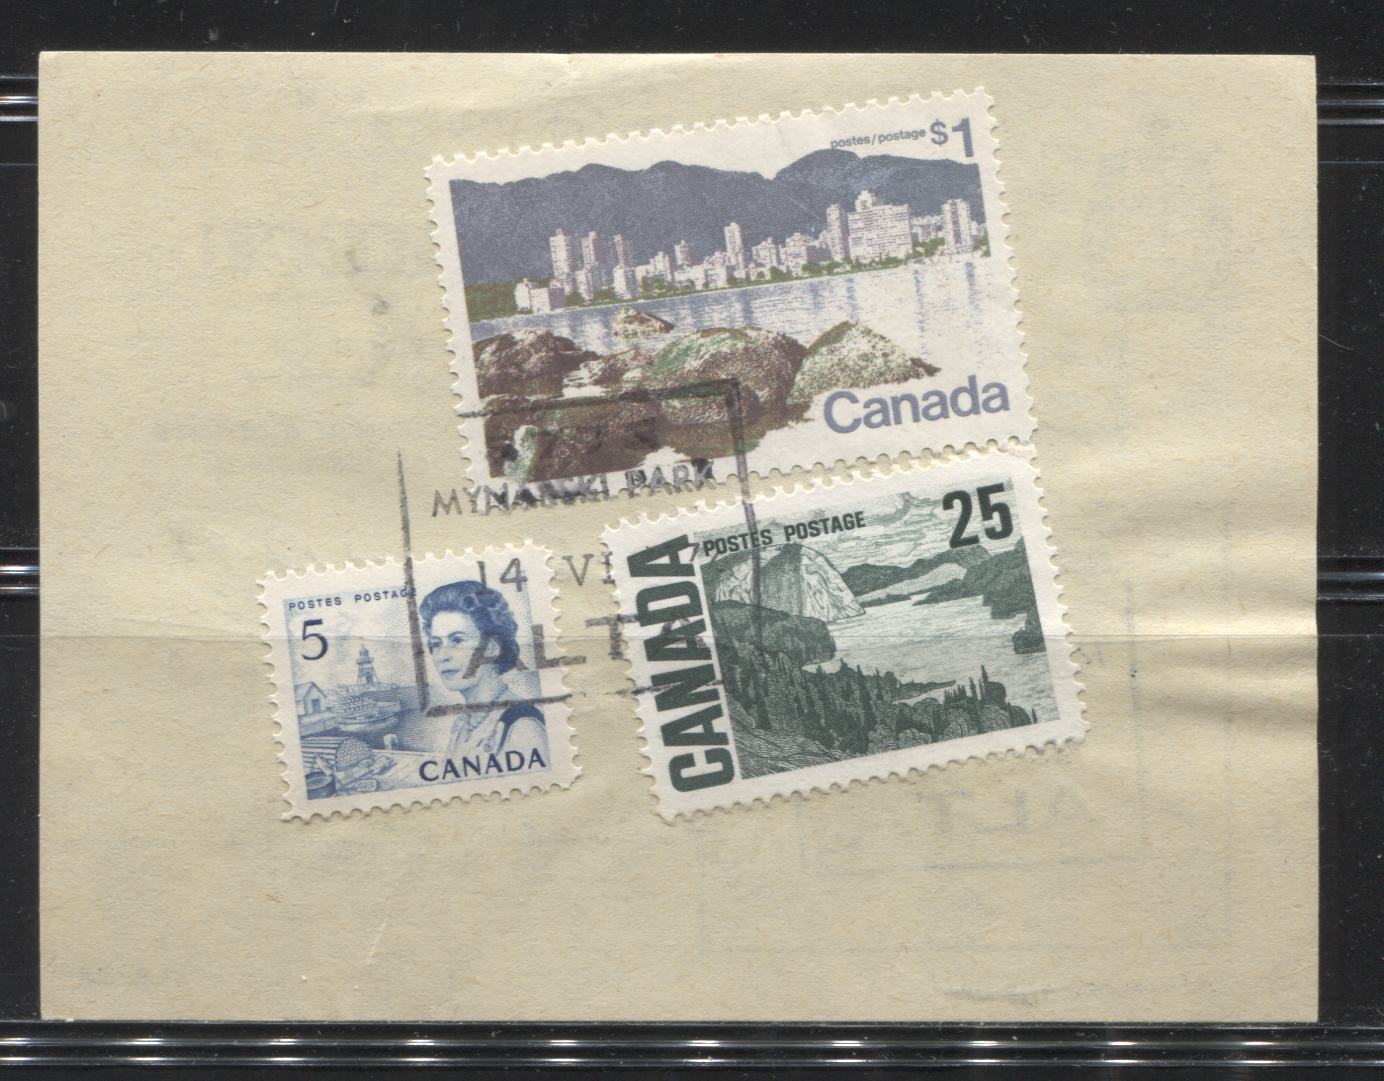 Lot 172 Canada #458, 465ii, 600 5c Blue, 25c Bluish Slate Green & $1 Multicoloured, Fishing Village, Solemn Land & Vancouver, 1967-1973 Centennial Issue & 1972-1978 Caricature Issue, Combination Use on June 1972 Bulk Mailing Receipt